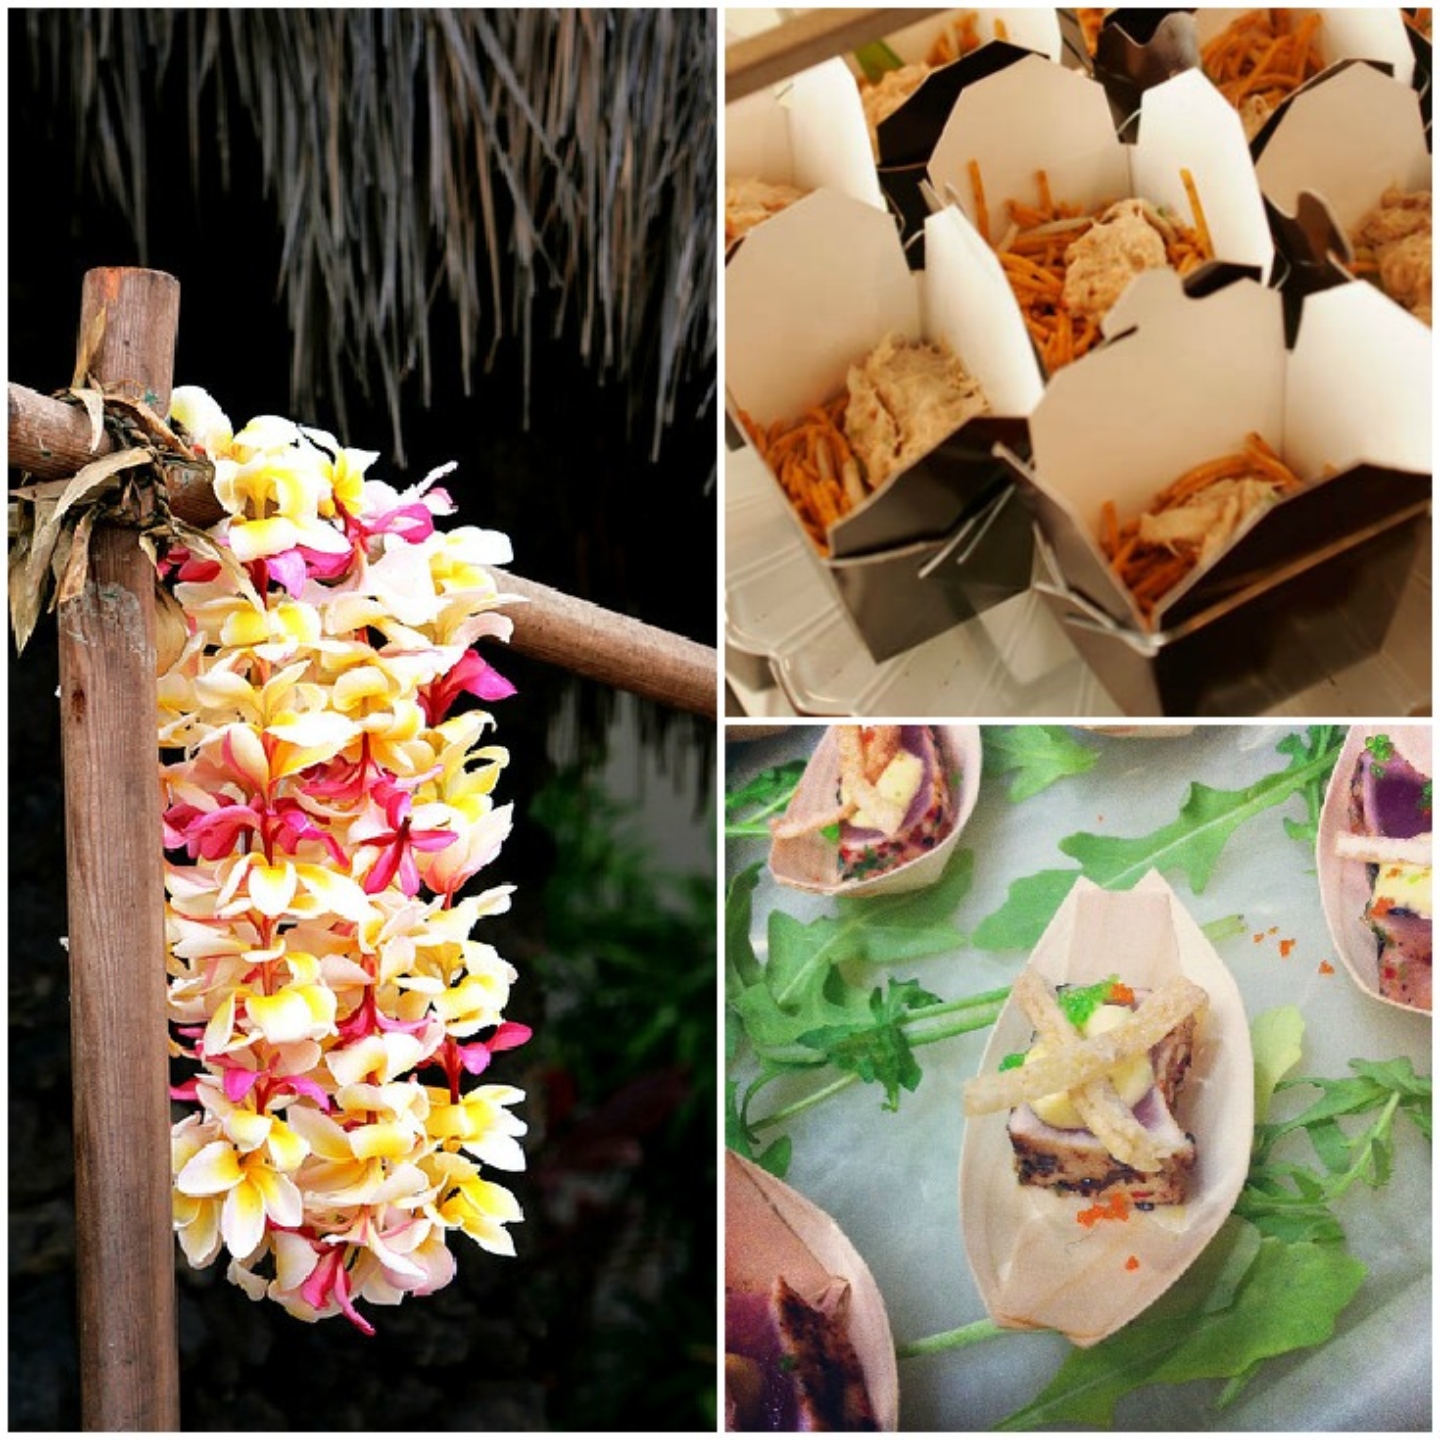 Luau Party - Hawaiian Style Buffet, Catering Event